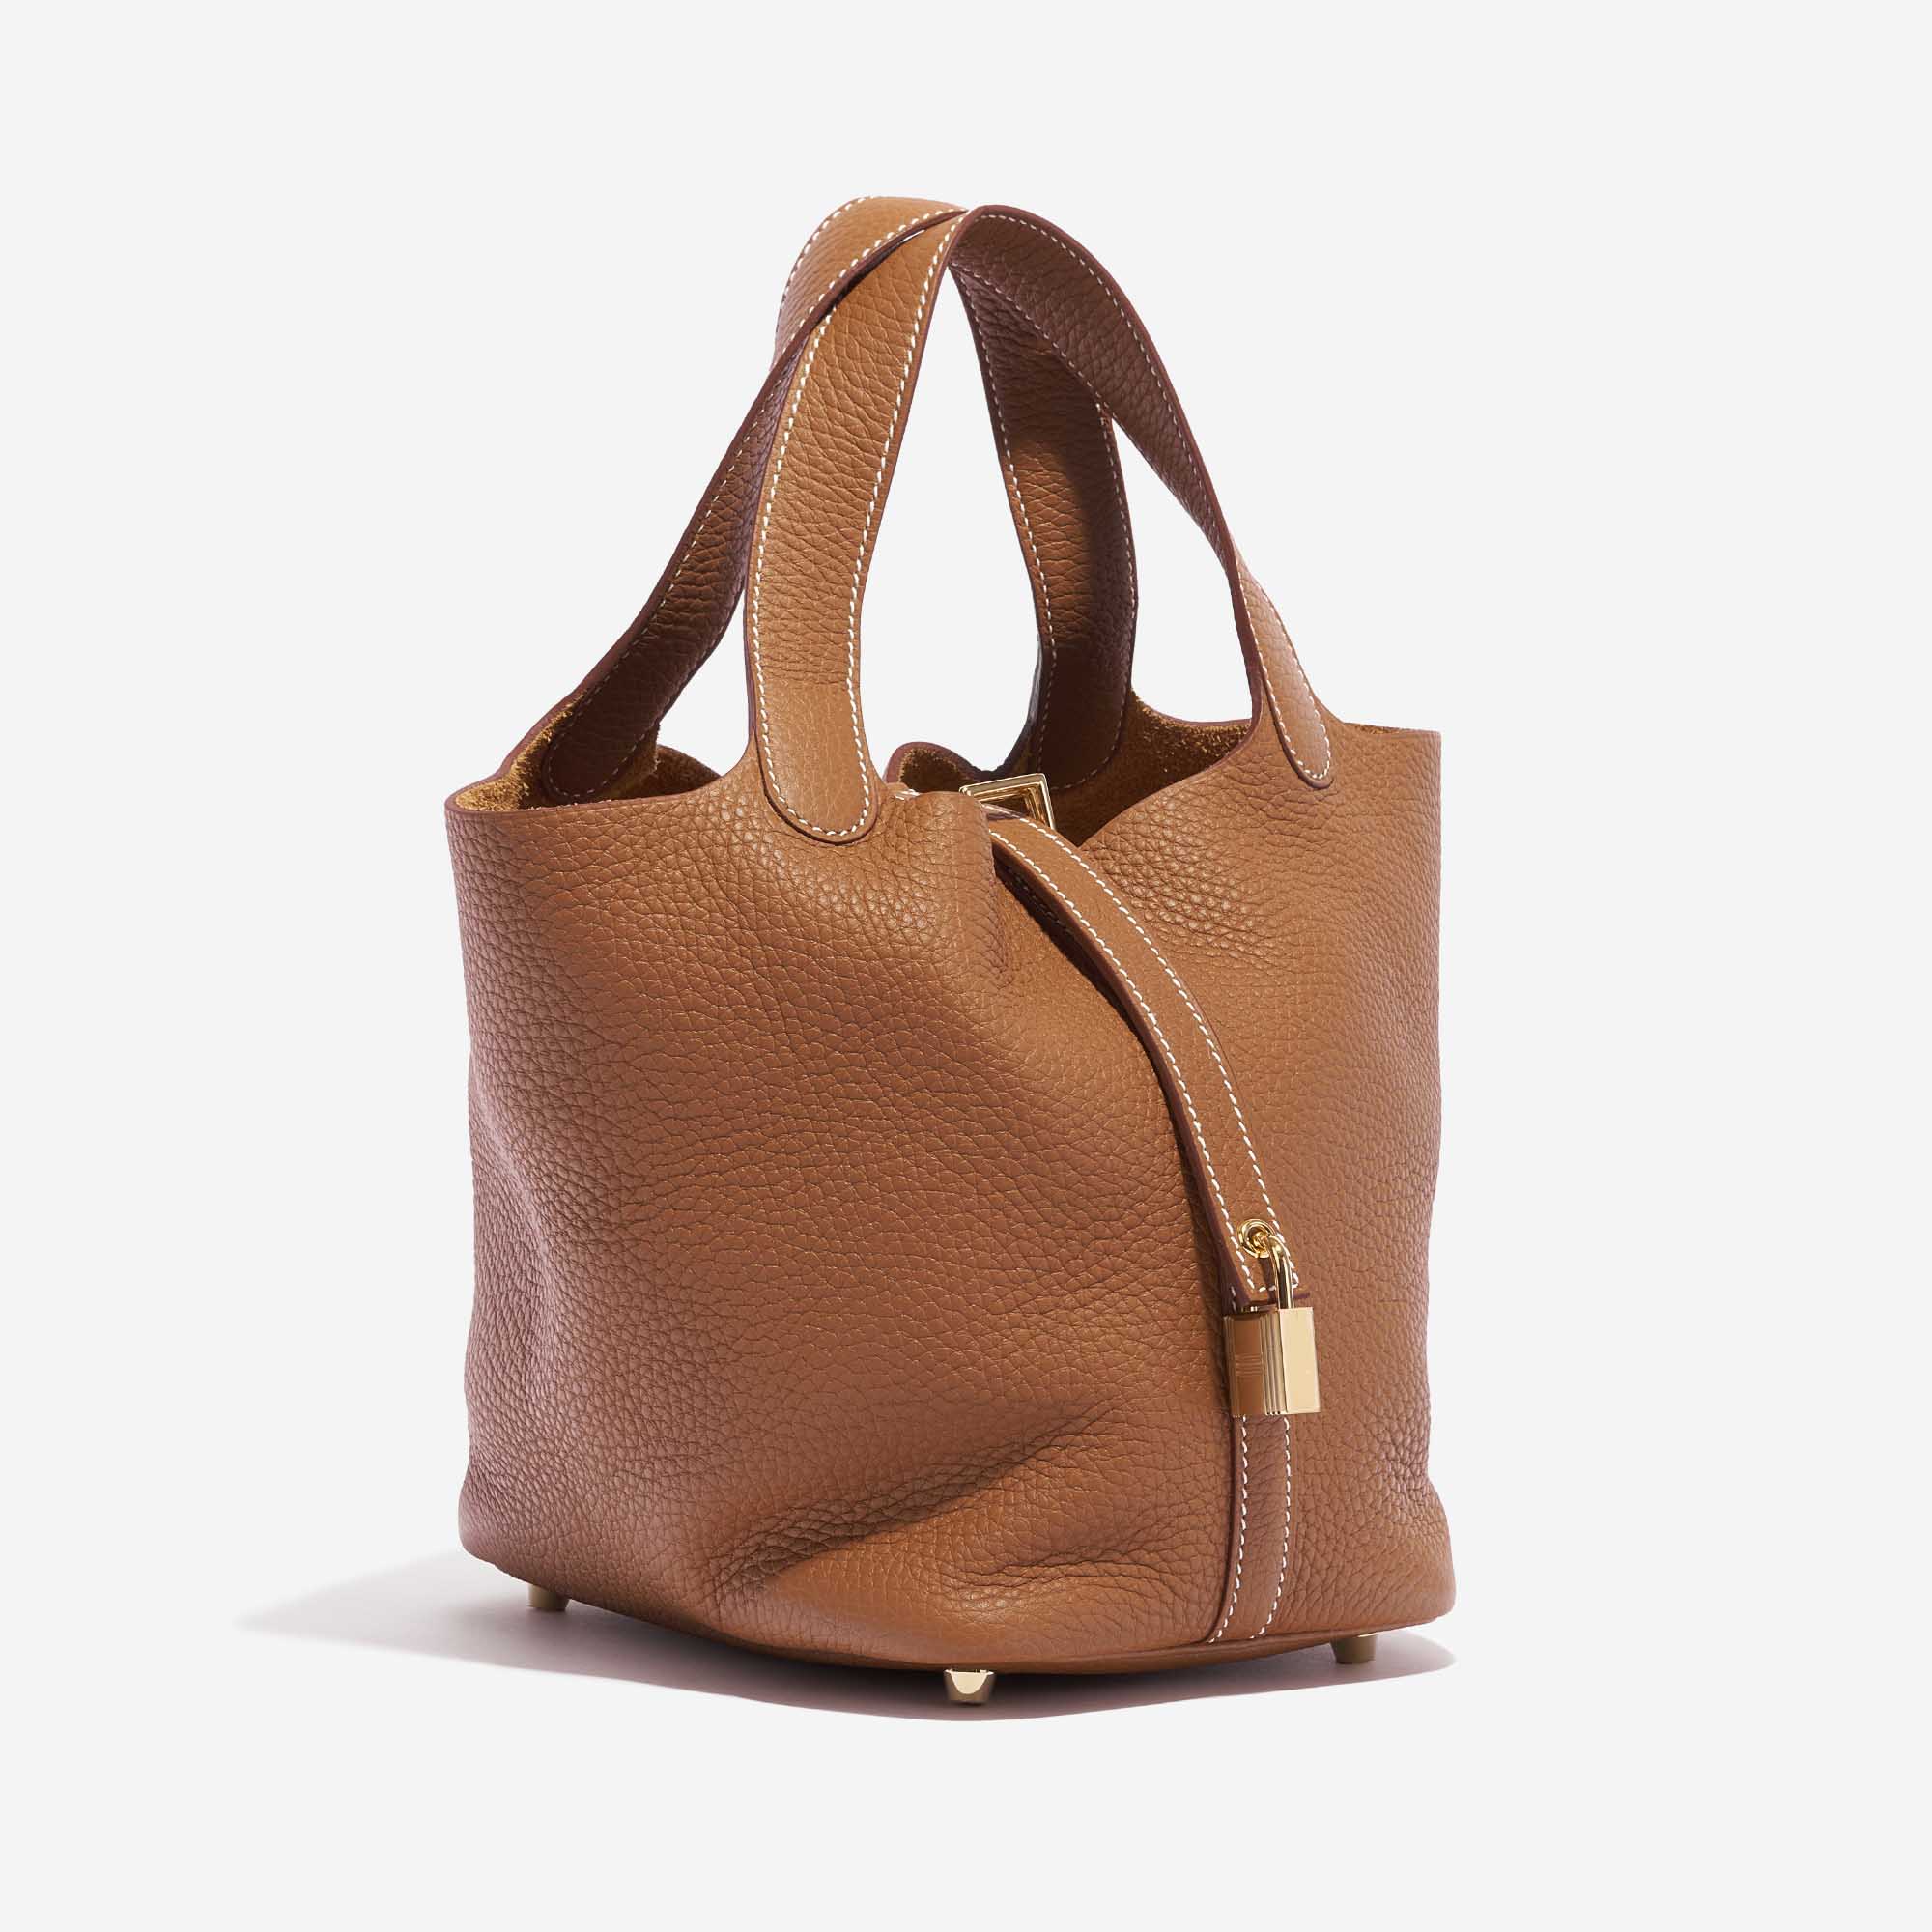 Pre-owned Hermès bag Picotin 18 Taurillon Clemence Gold Brown Side Front | Sell your designer bag on Saclab.com